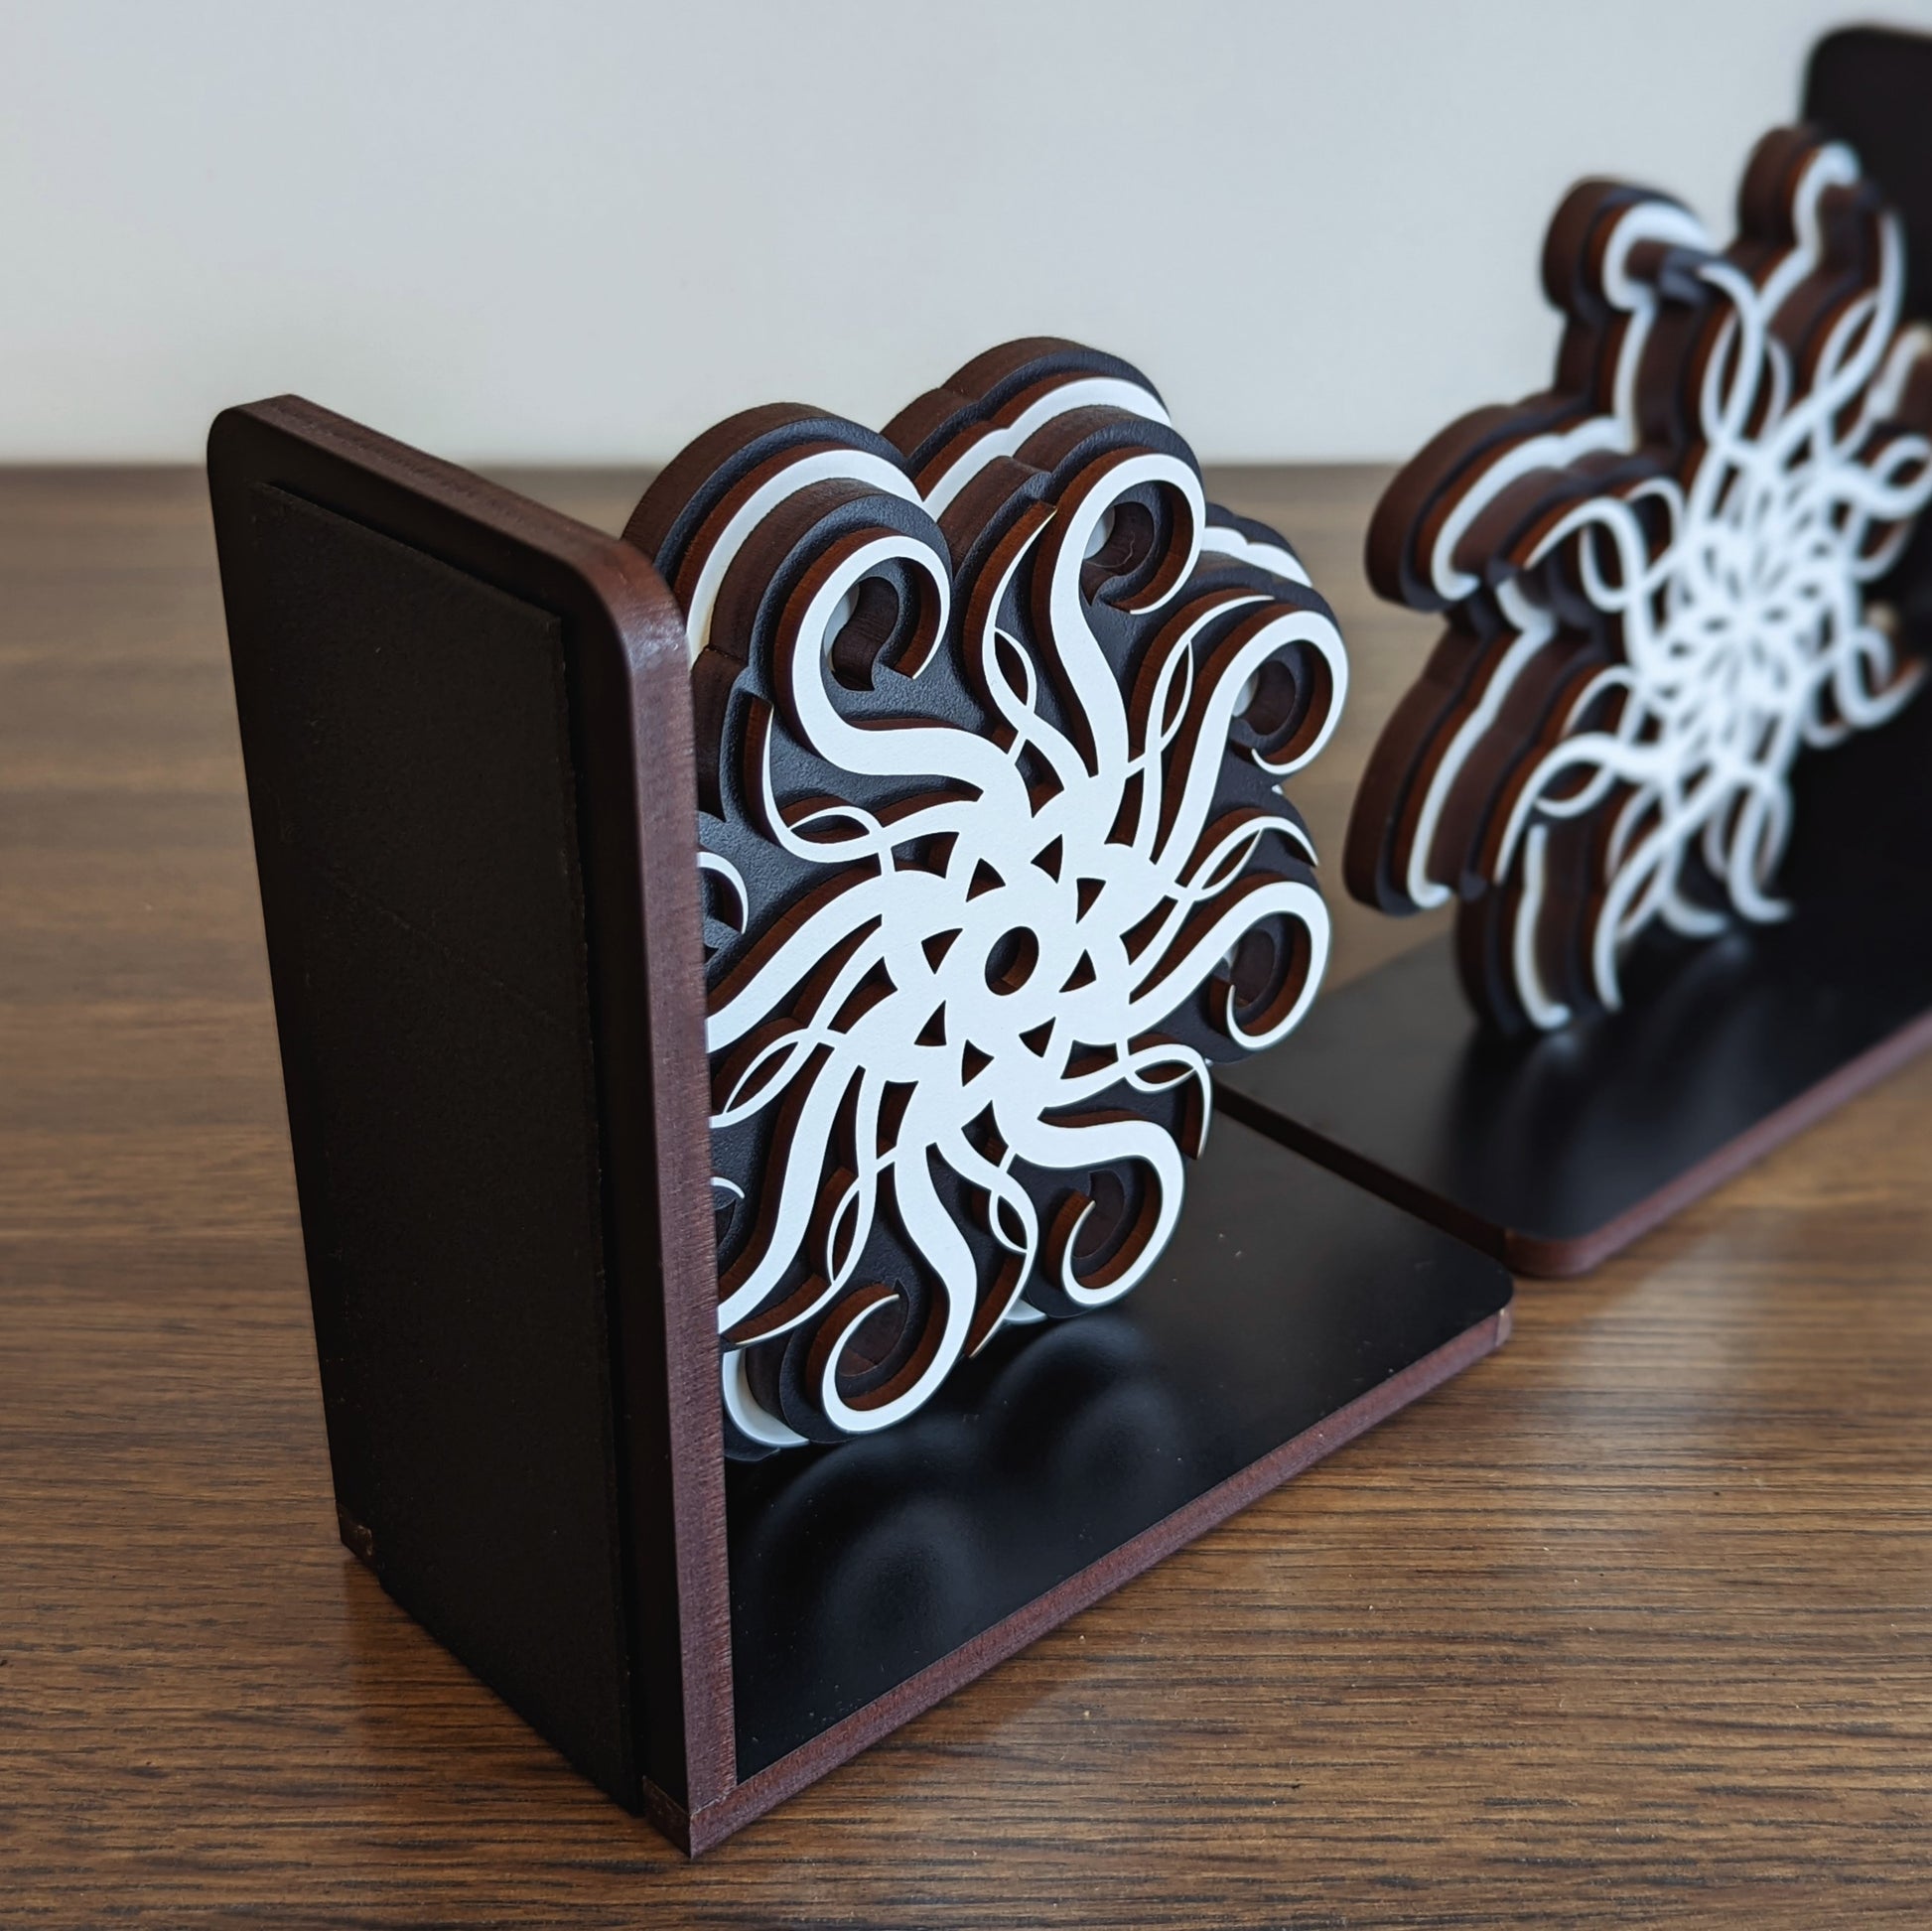 wooden bookends inspired by cryptics spren from brandon sanderson stormlight archive